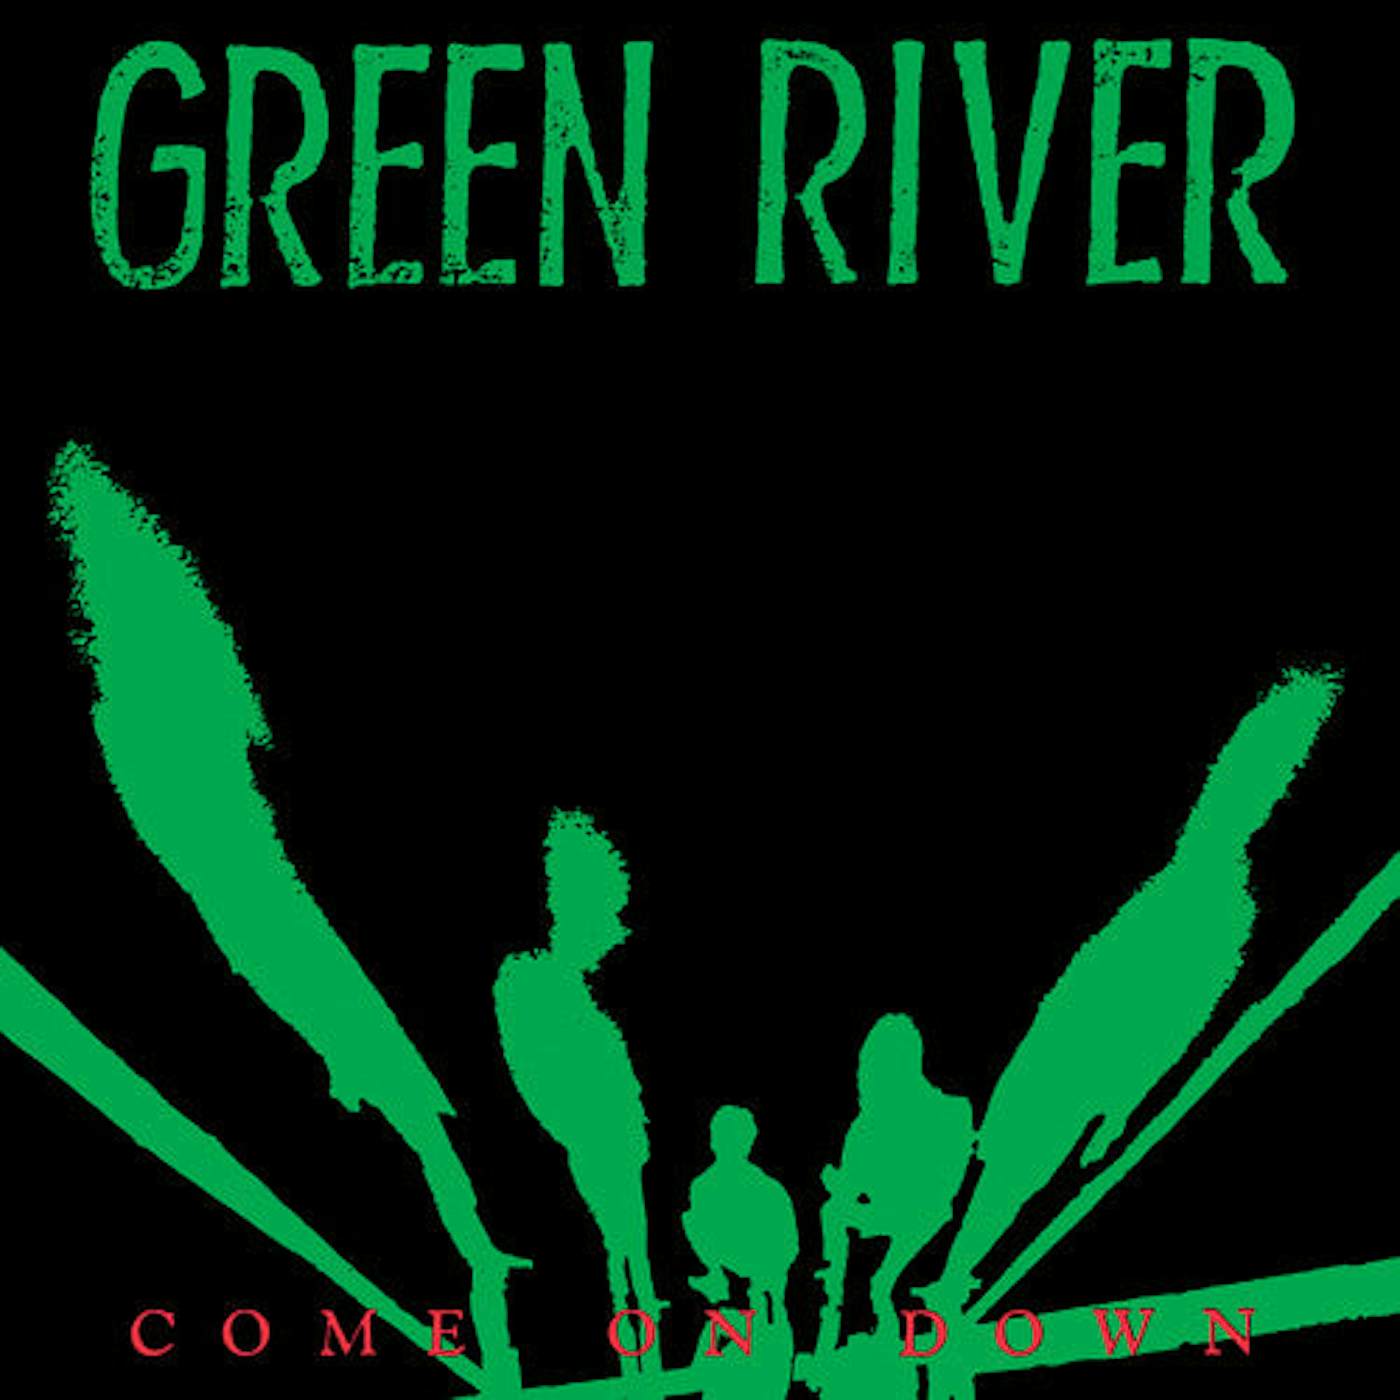 Green River COME ON DOWN (LIME GREEN VINYL) (AMS EXCLUSIVE) Vinyl Record